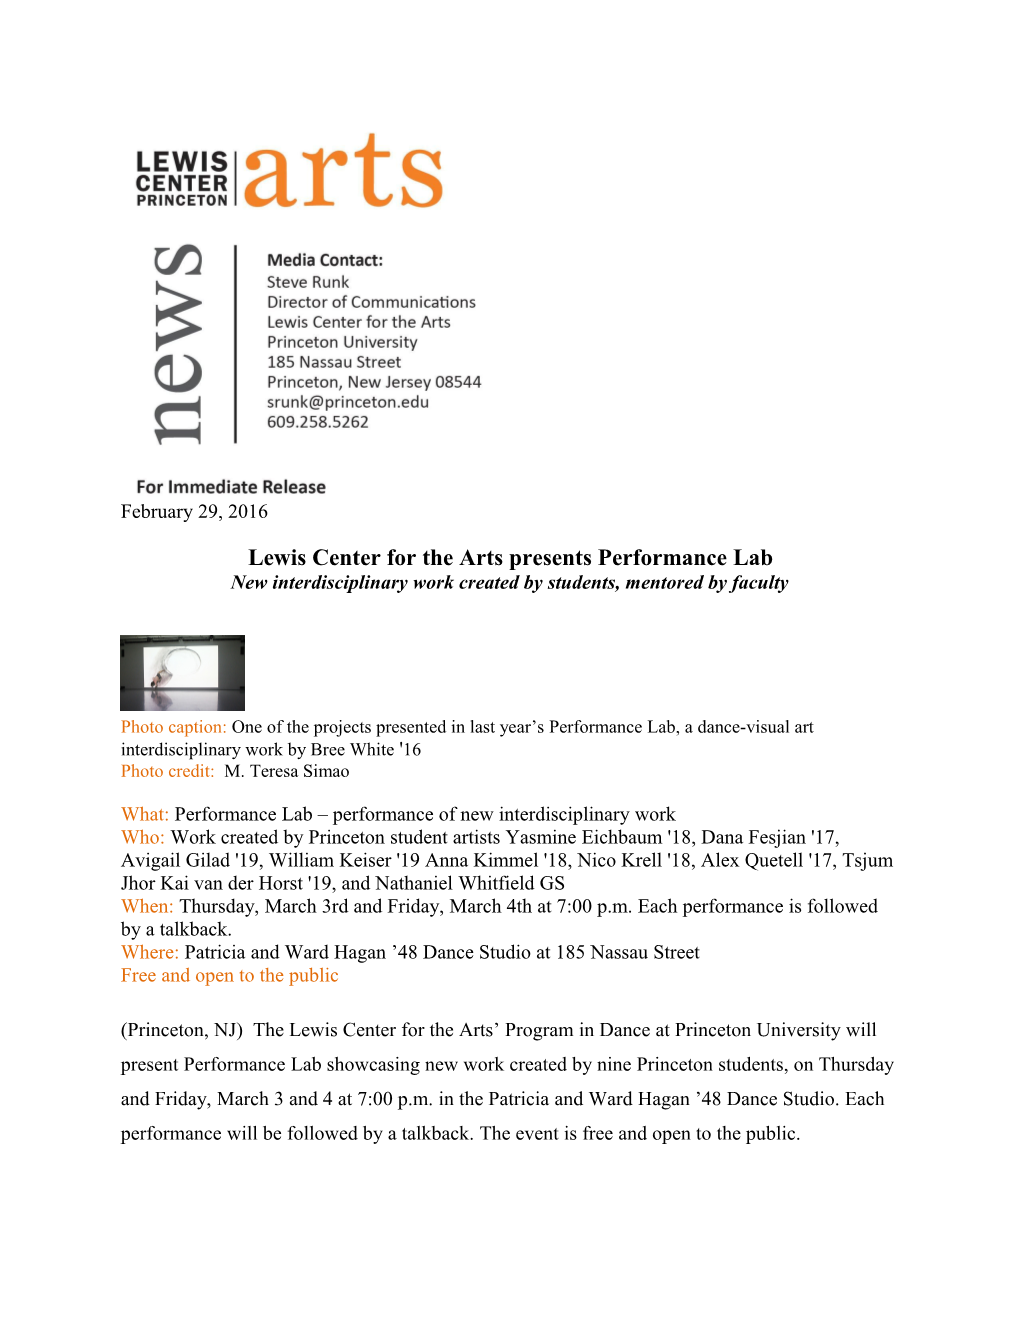 Lewis Center for the Arts Presents Performance Lab